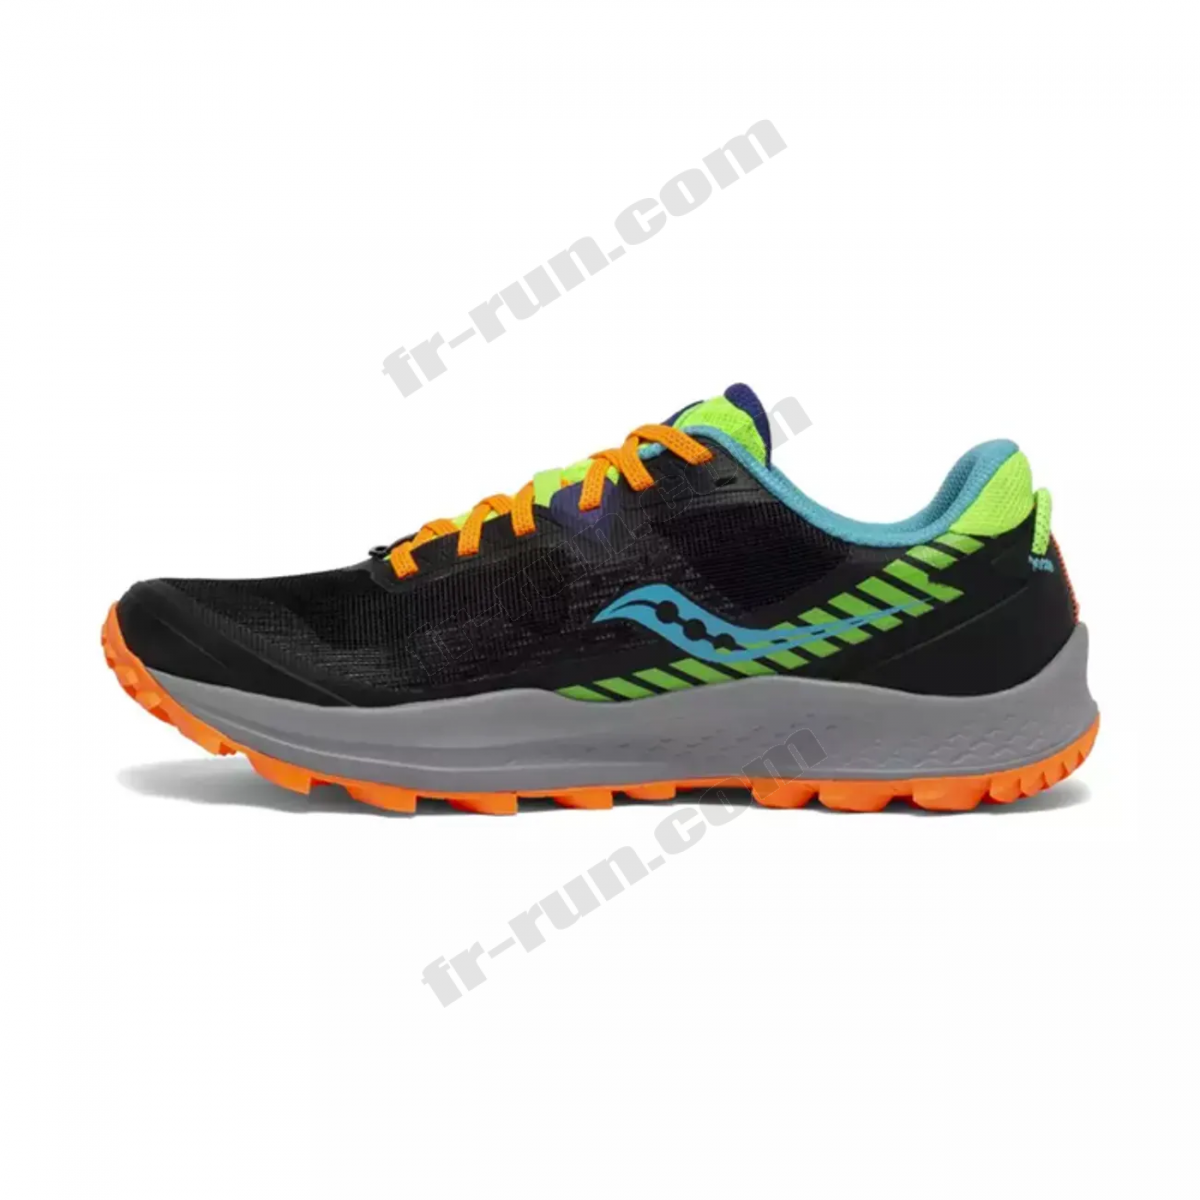 Saucony/CHAUSSURES BASSES running homme SAUCONY PEREGRINE 11 M √ Nouveau style √ Soldes - Saucony/CHAUSSURES BASSES running homme SAUCONY PEREGRINE 11 M √ Nouveau style √ Soldes